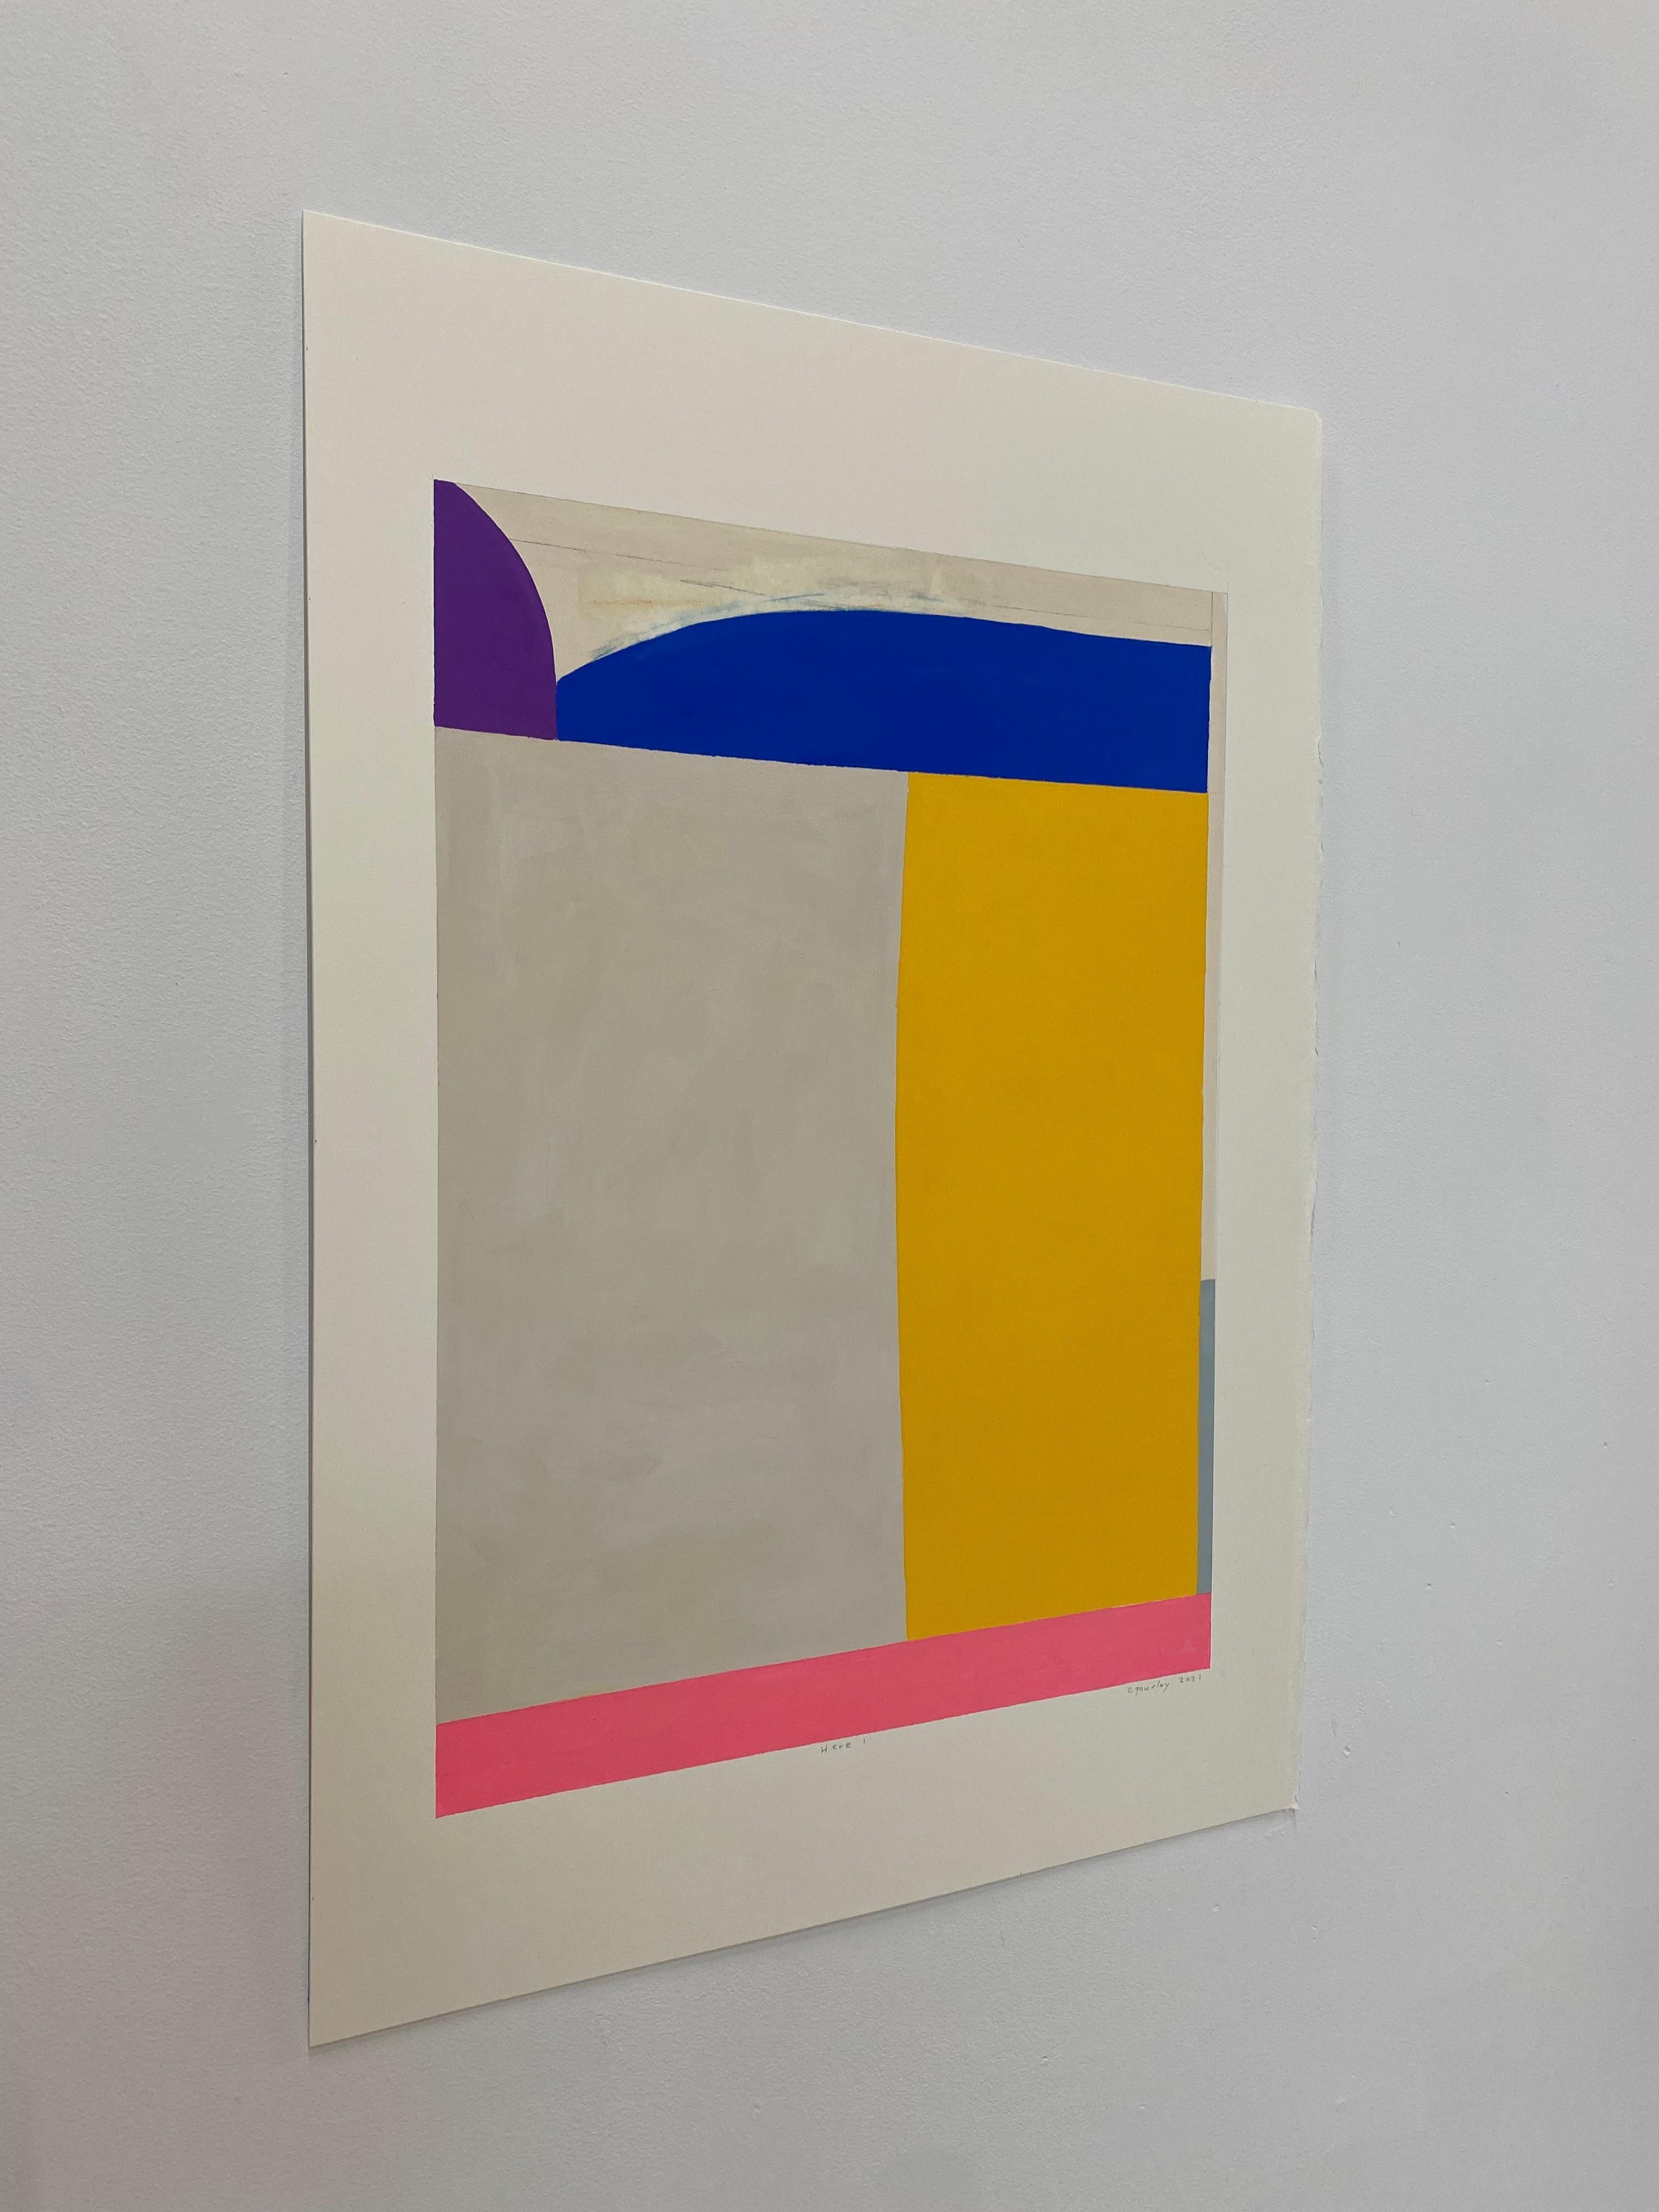 In this abstract painting in colored pencil and gouache on Fabriano paper by Elizabeth Gourlay, clean and precise, carefully ordered blocks of color in shades of light pink, navy blue, dark purple and golden yellow are bright and luminous against